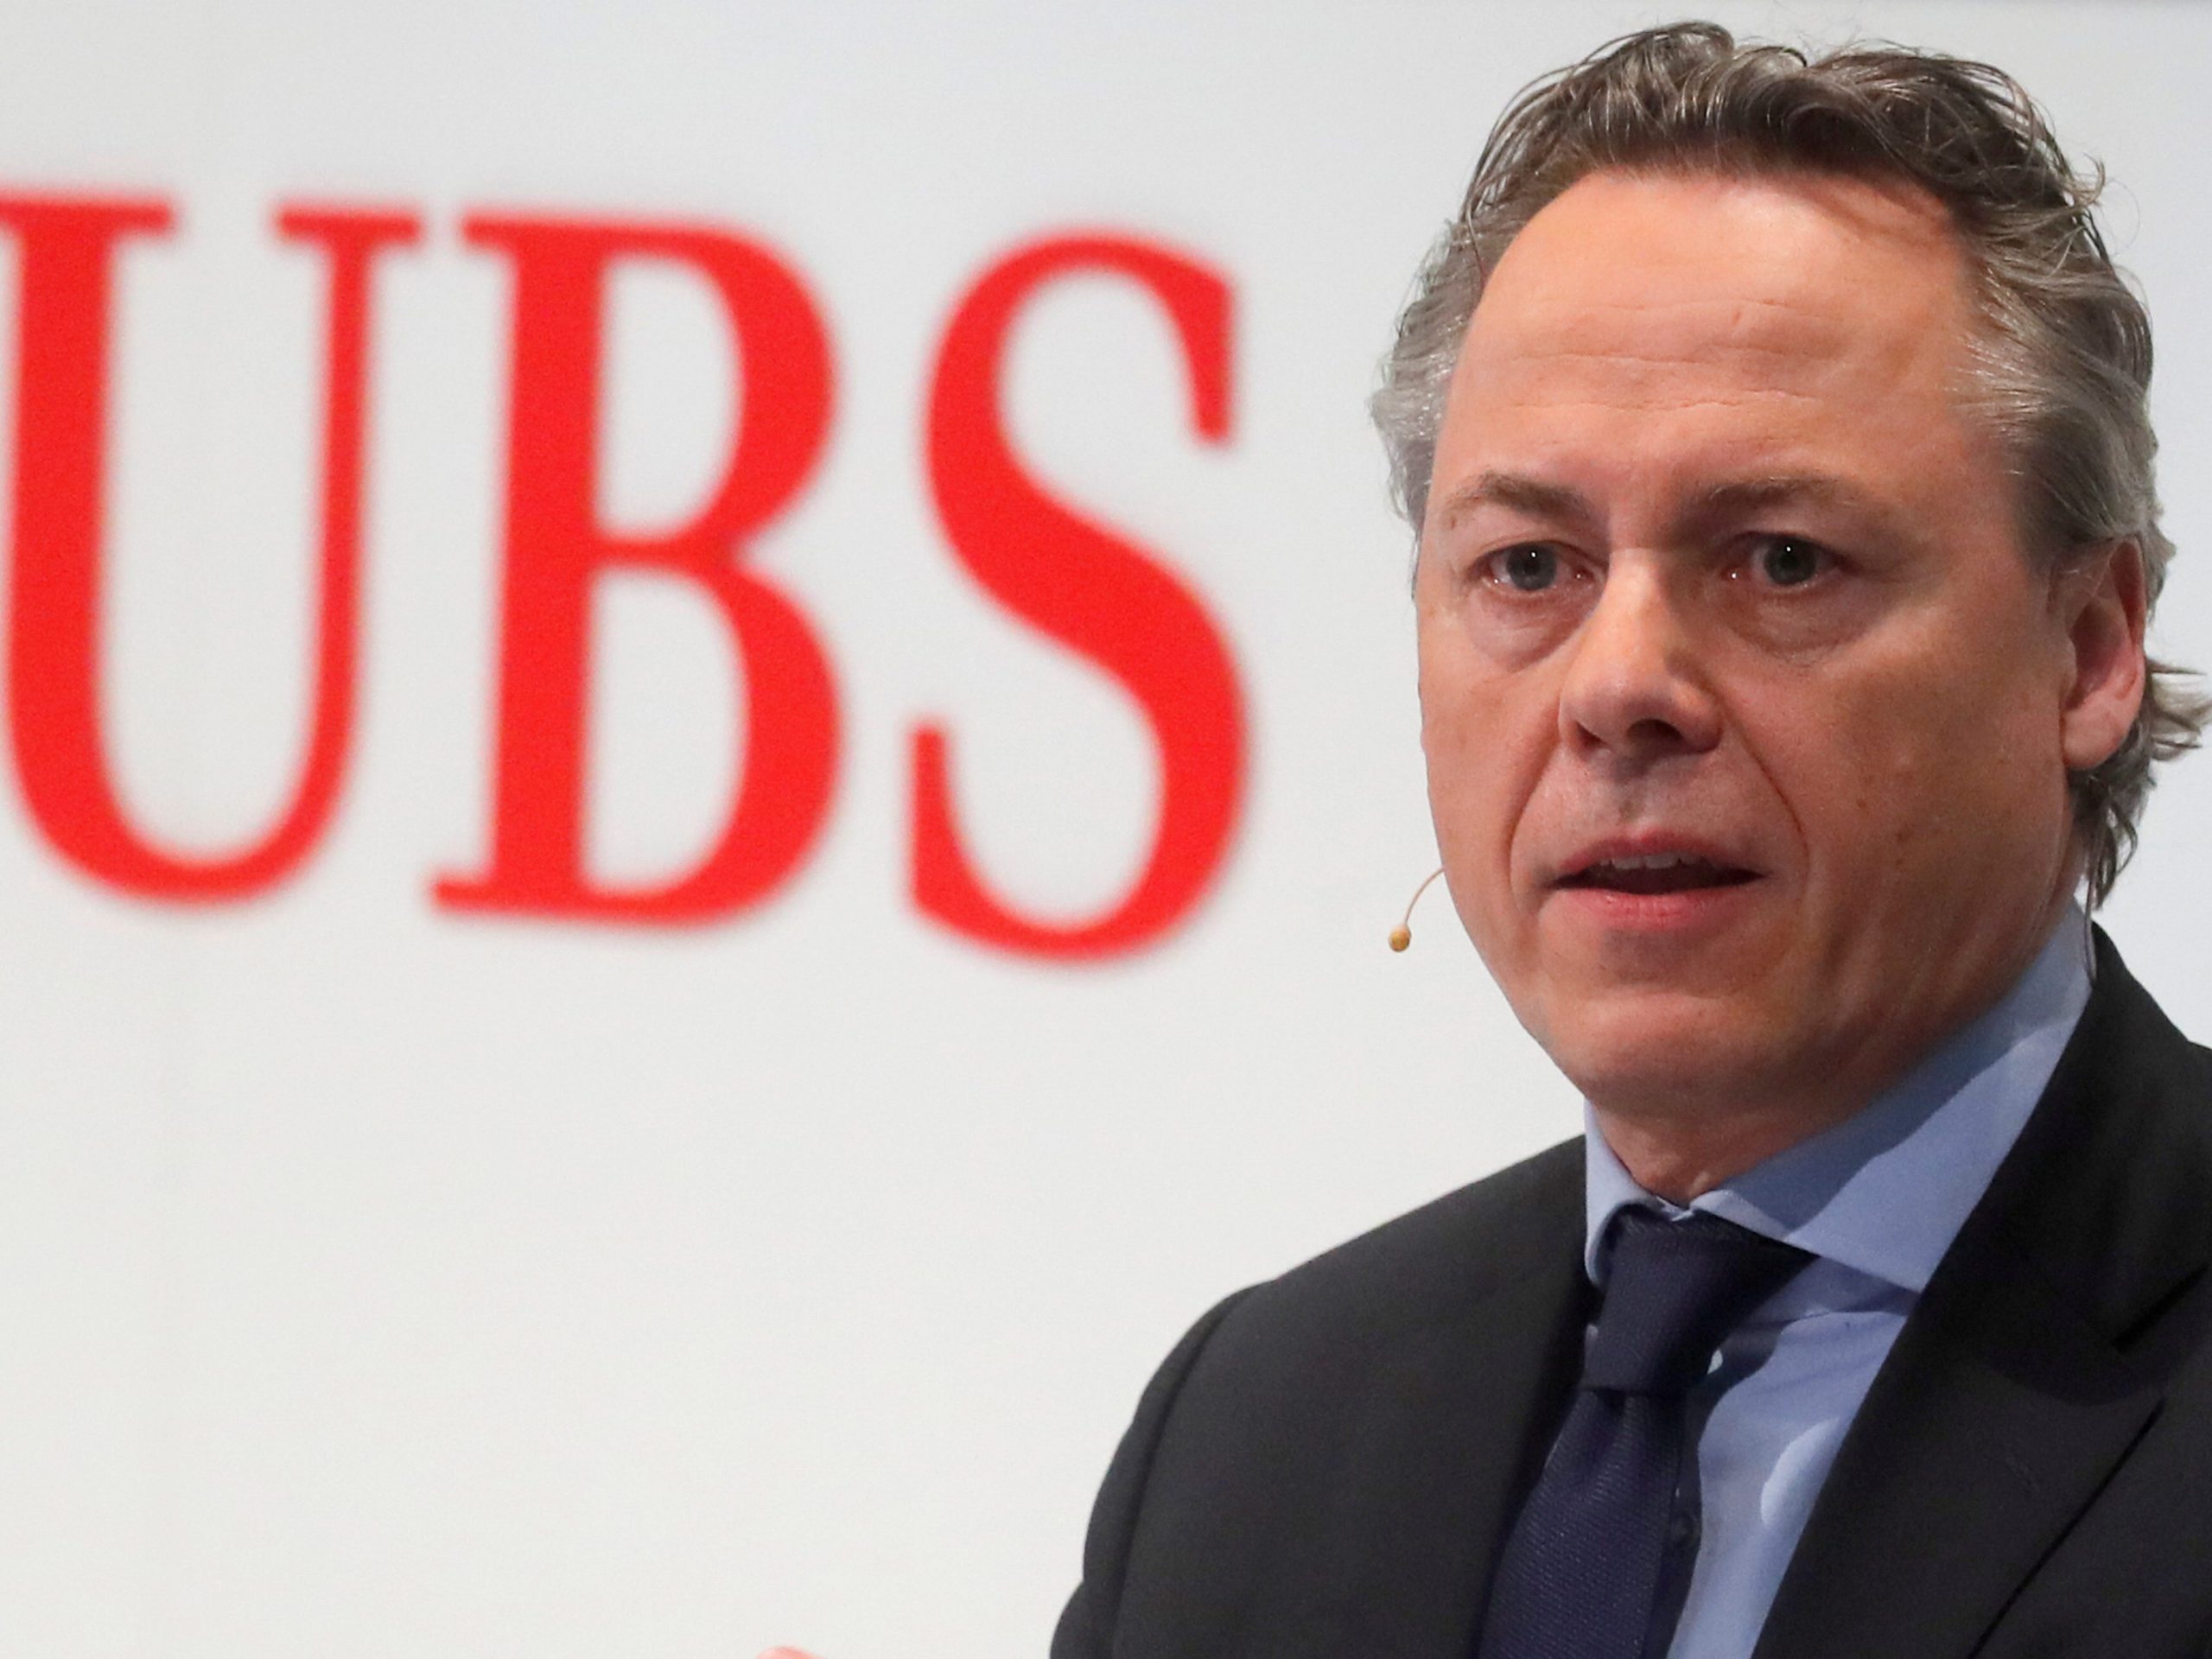 UBS Chief Executive Ralph Hamers addresses a news conference in Zurich, Switzerland in February 2020.